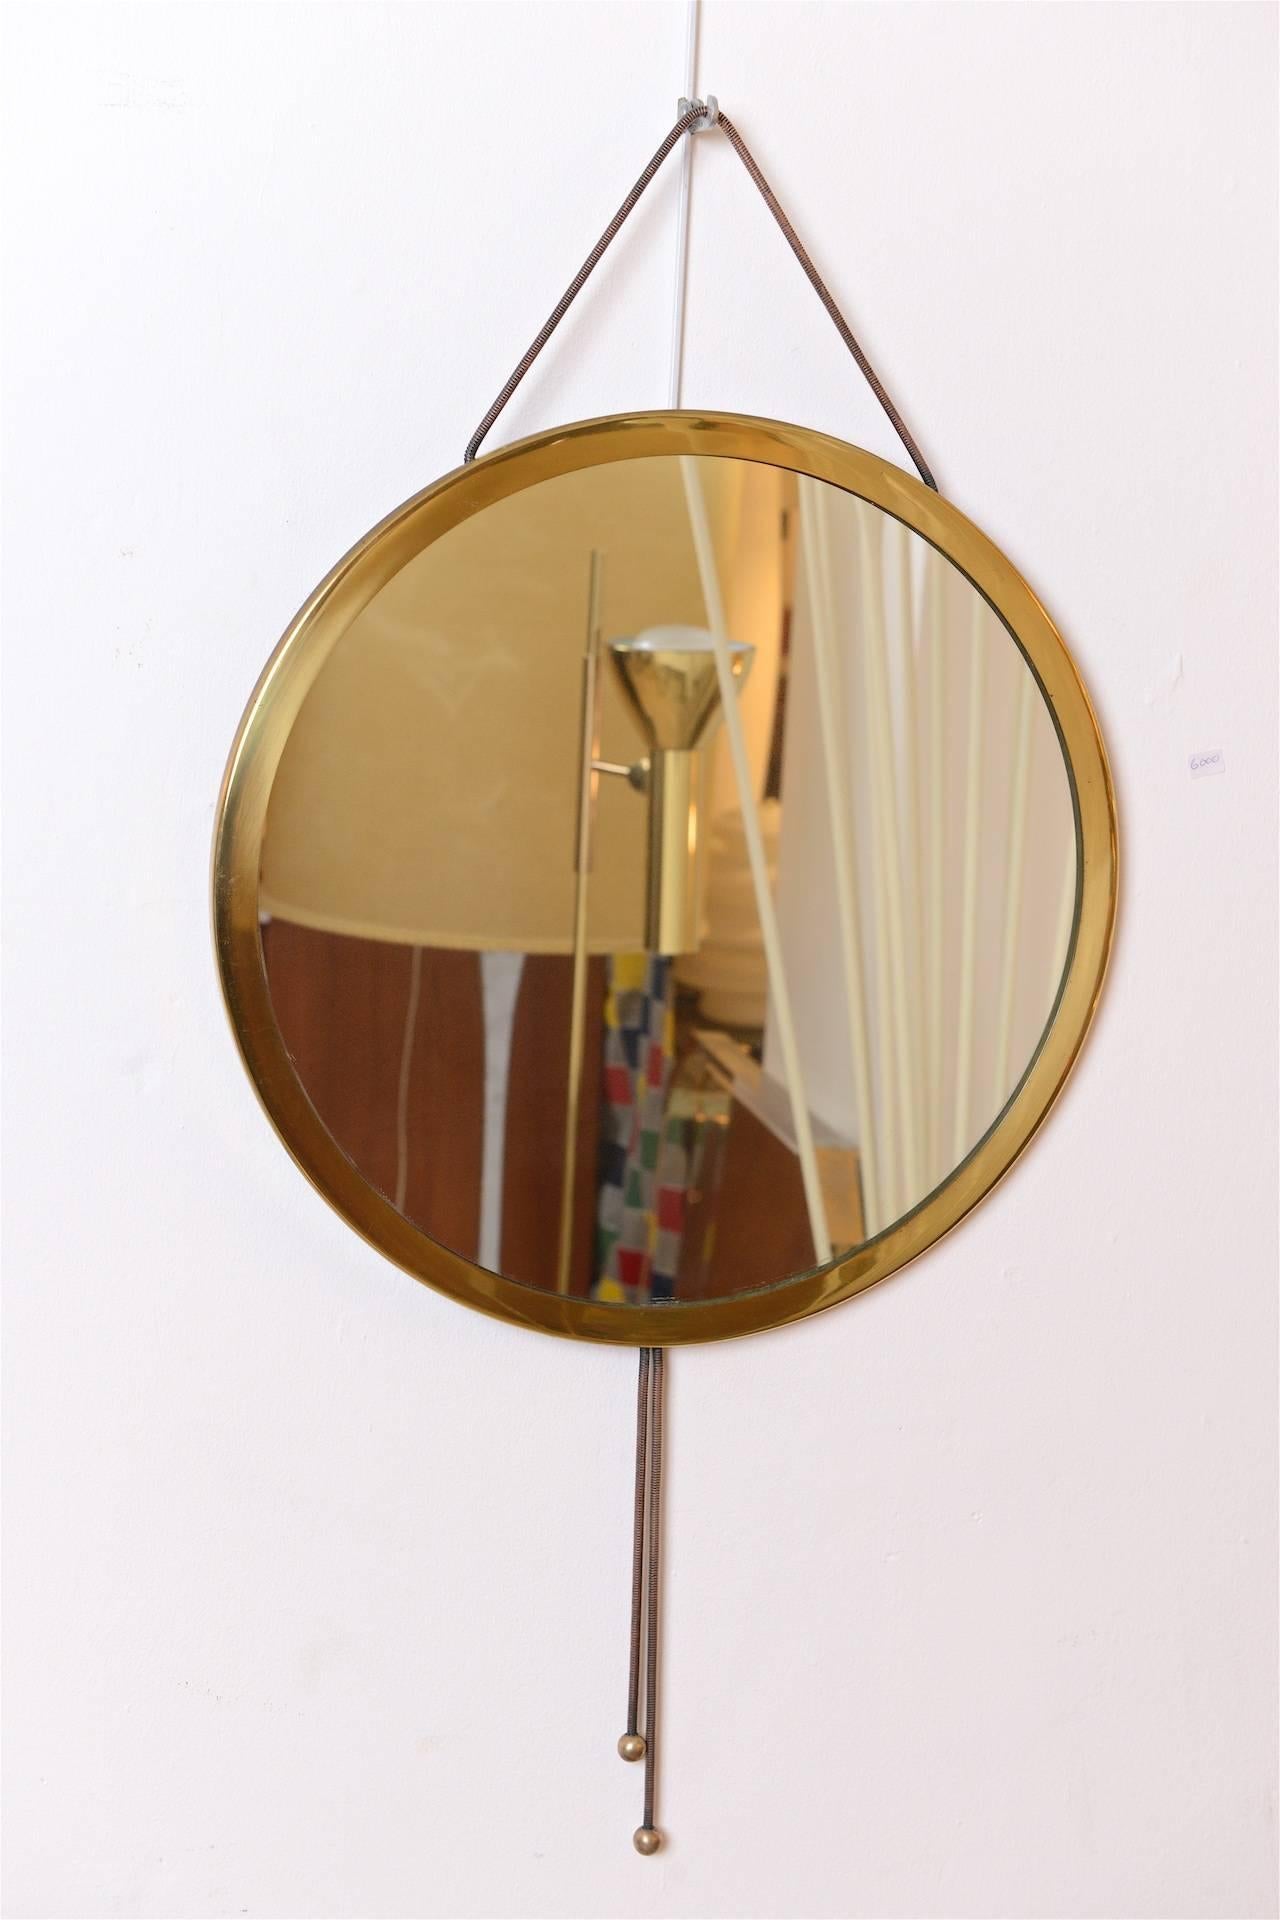 Very chic circular mirror with brass frame. 
Tassels in copper and brass.

(Details on mirror can be polished to copper and brass, 
tassels have been left in original condition).